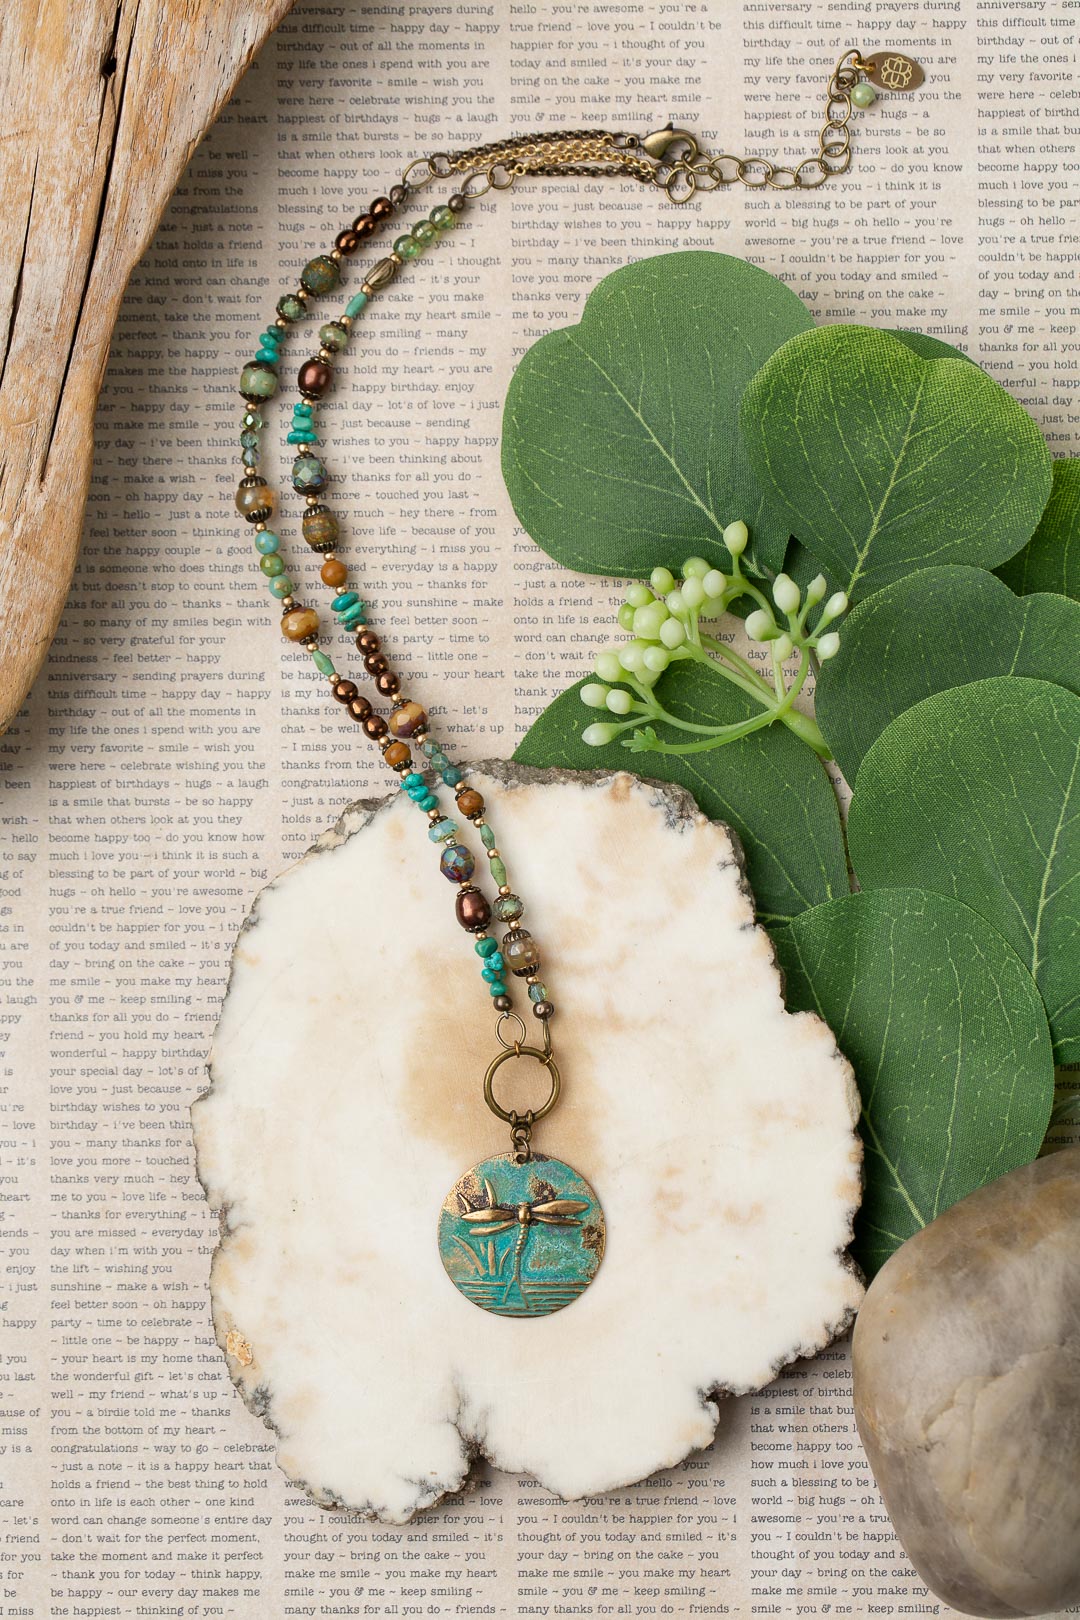 Rustic Creek 16.5-18.5" Czech Glass, Freshwater Pearl, Turquoise Dragonfly Collage Necklace